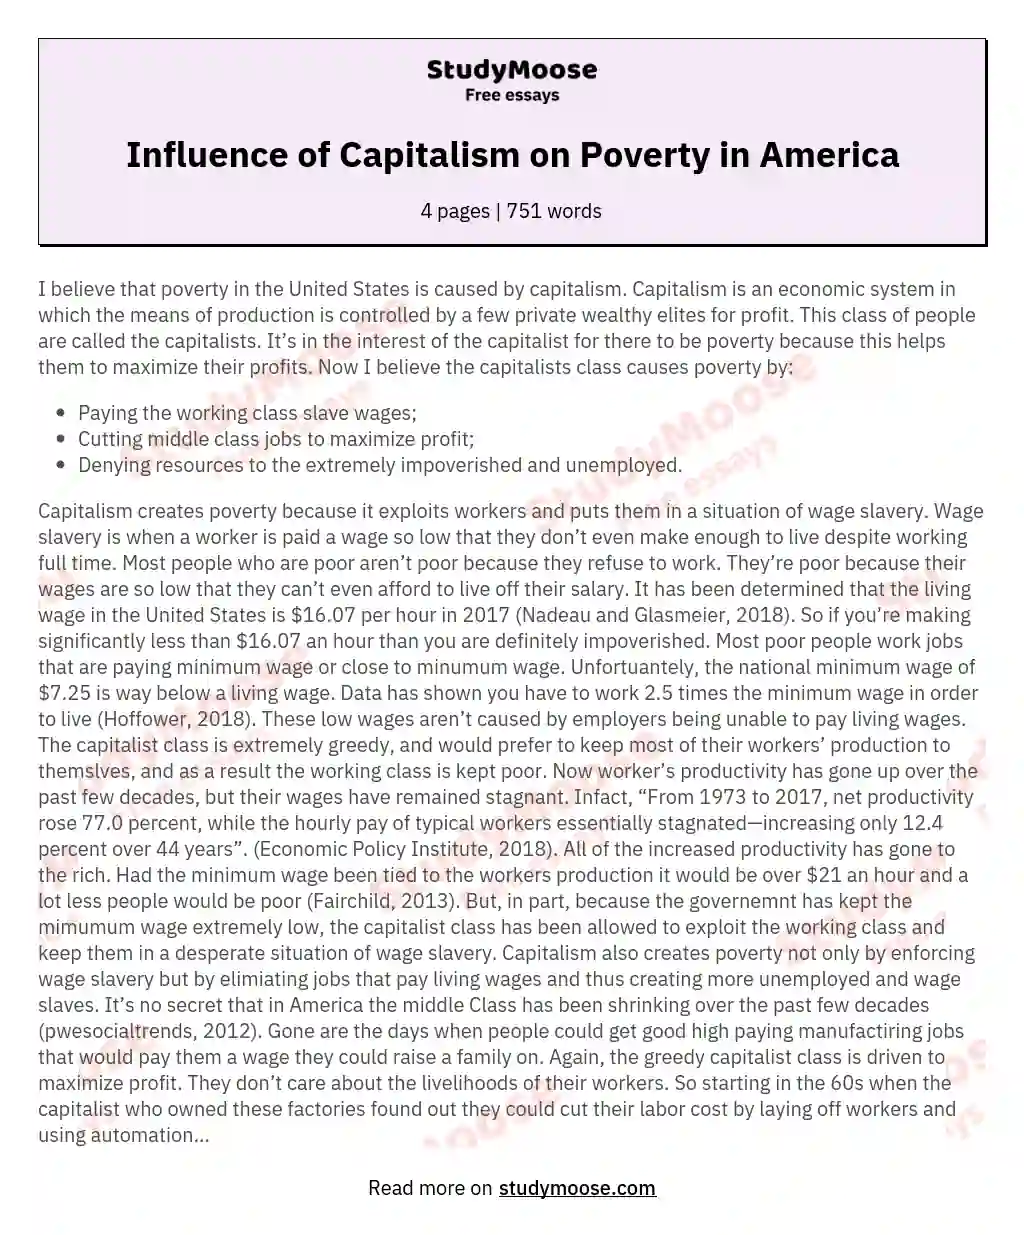 Influence of Capitalism on Poverty in America essay